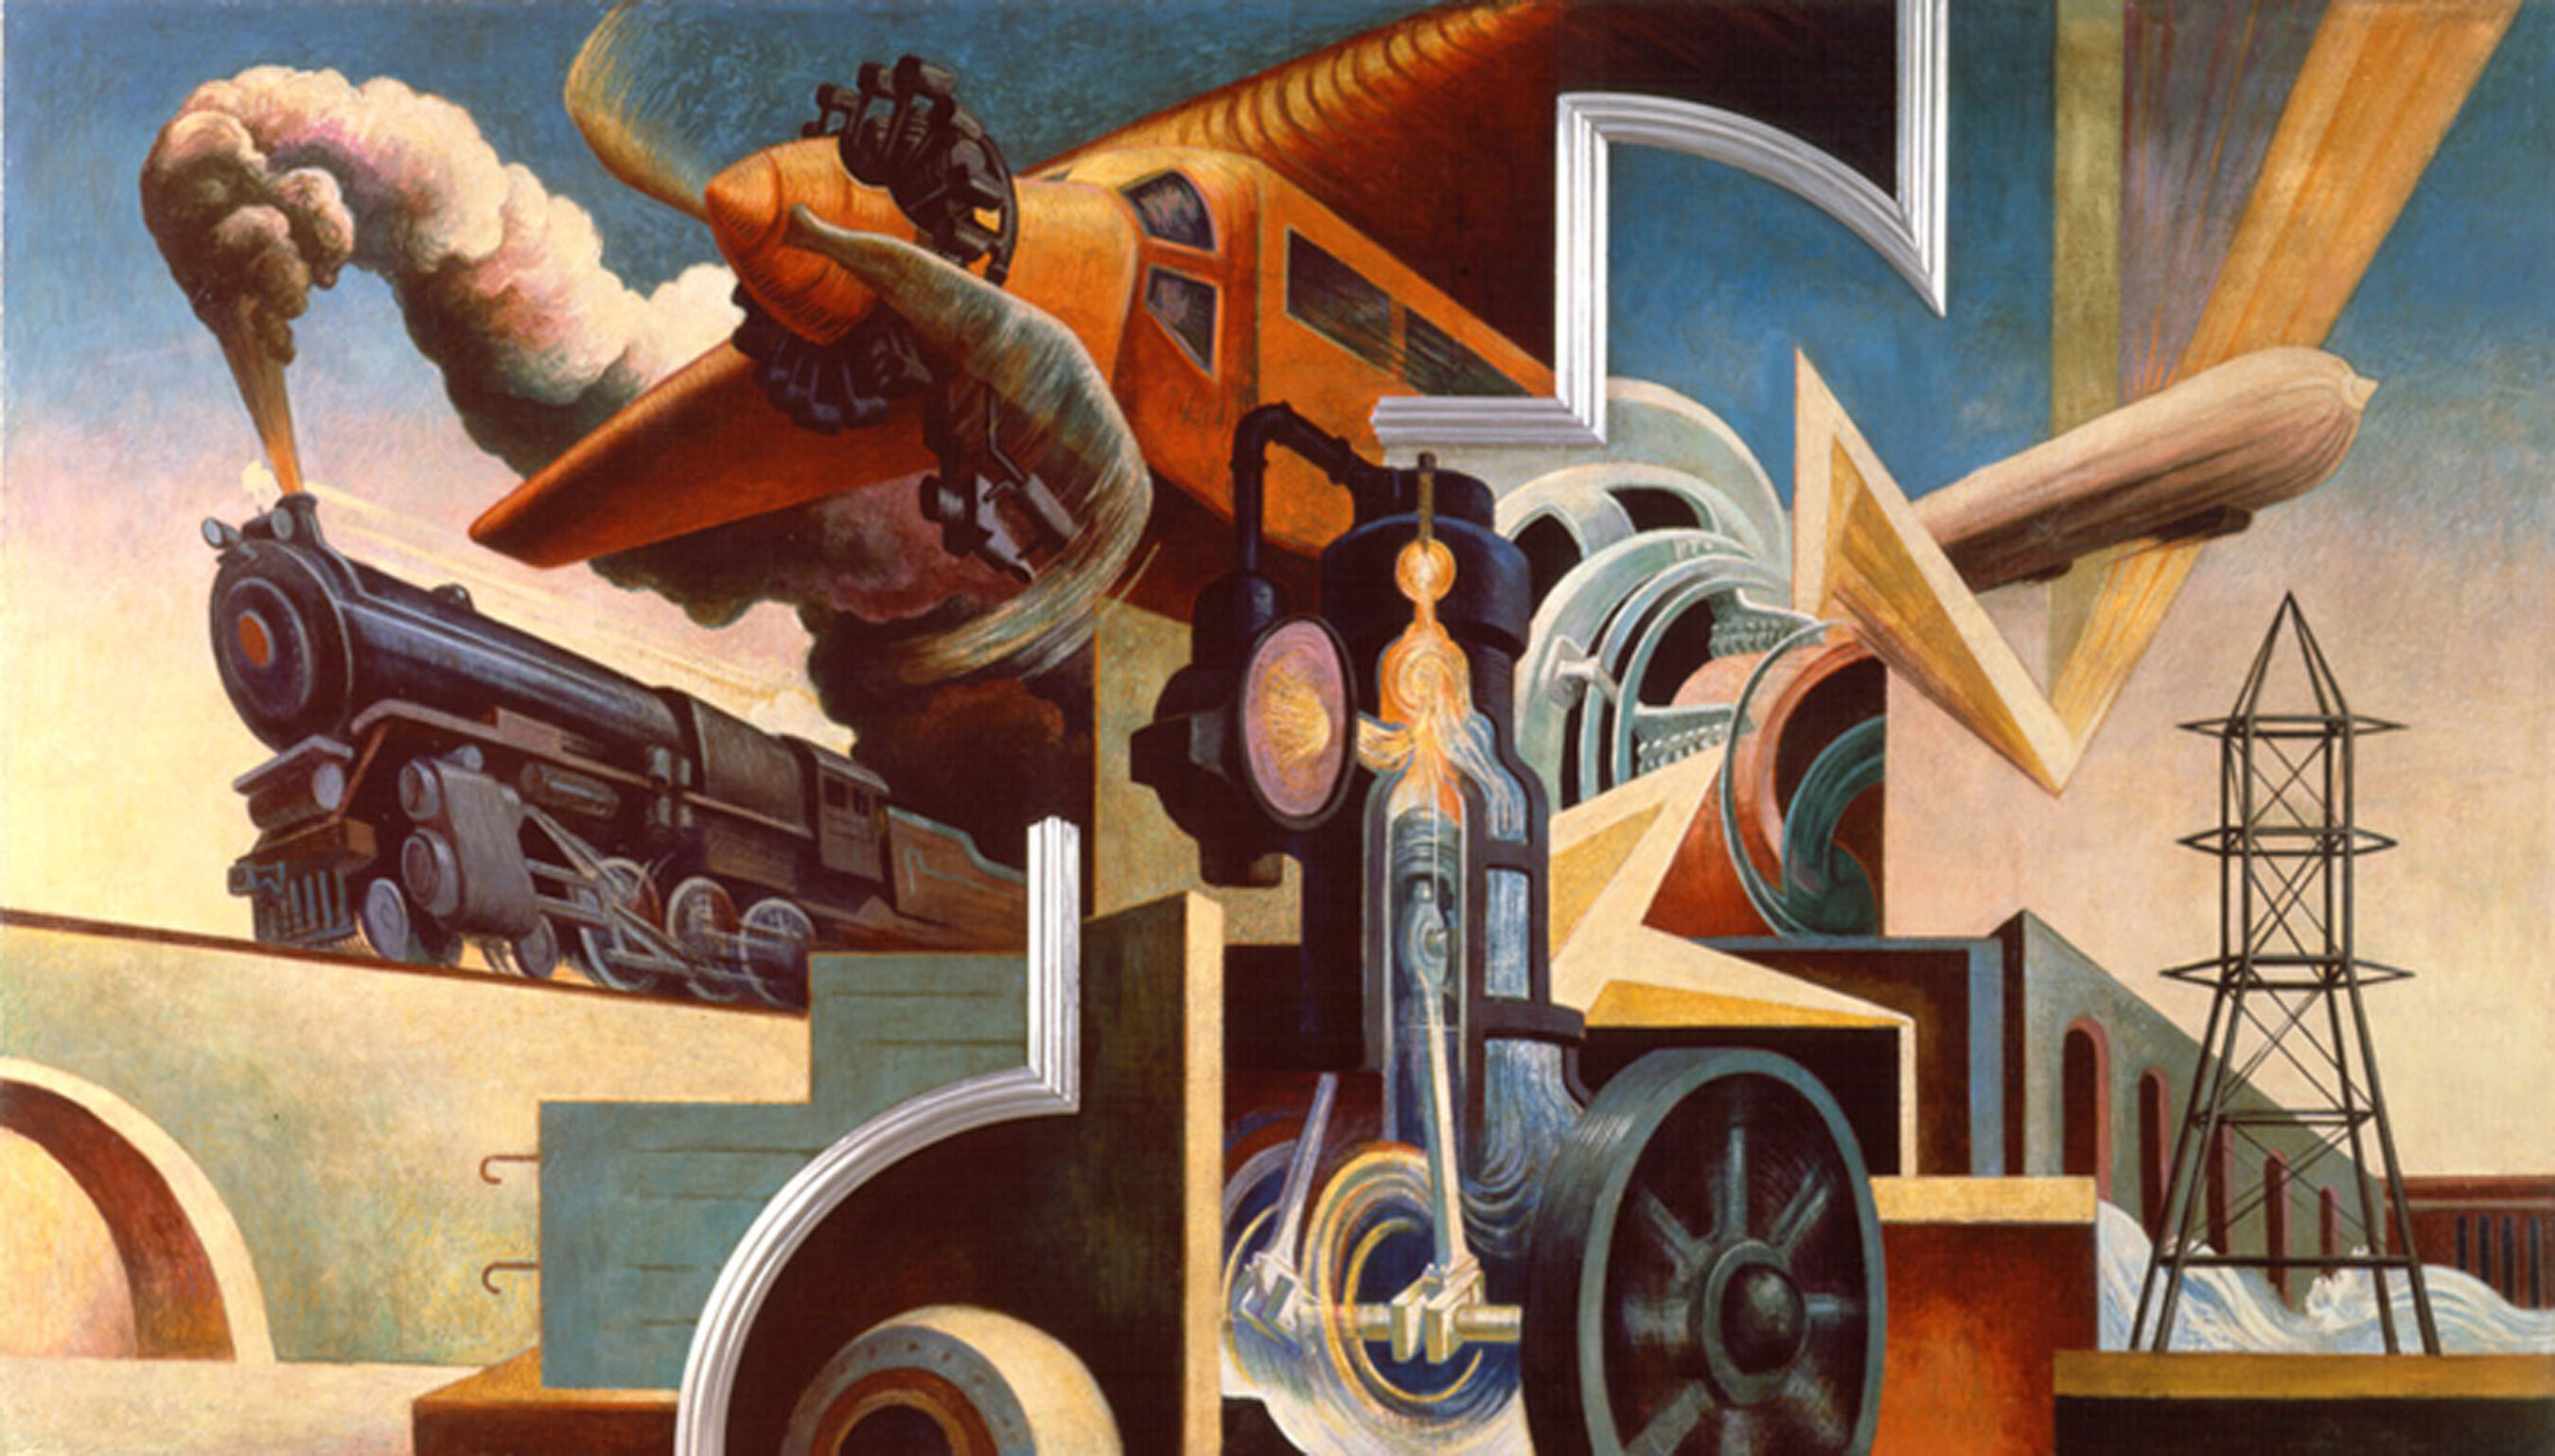 Epic 1930's Mural Donated to The Metropolitan Museum of Art | LATF USA